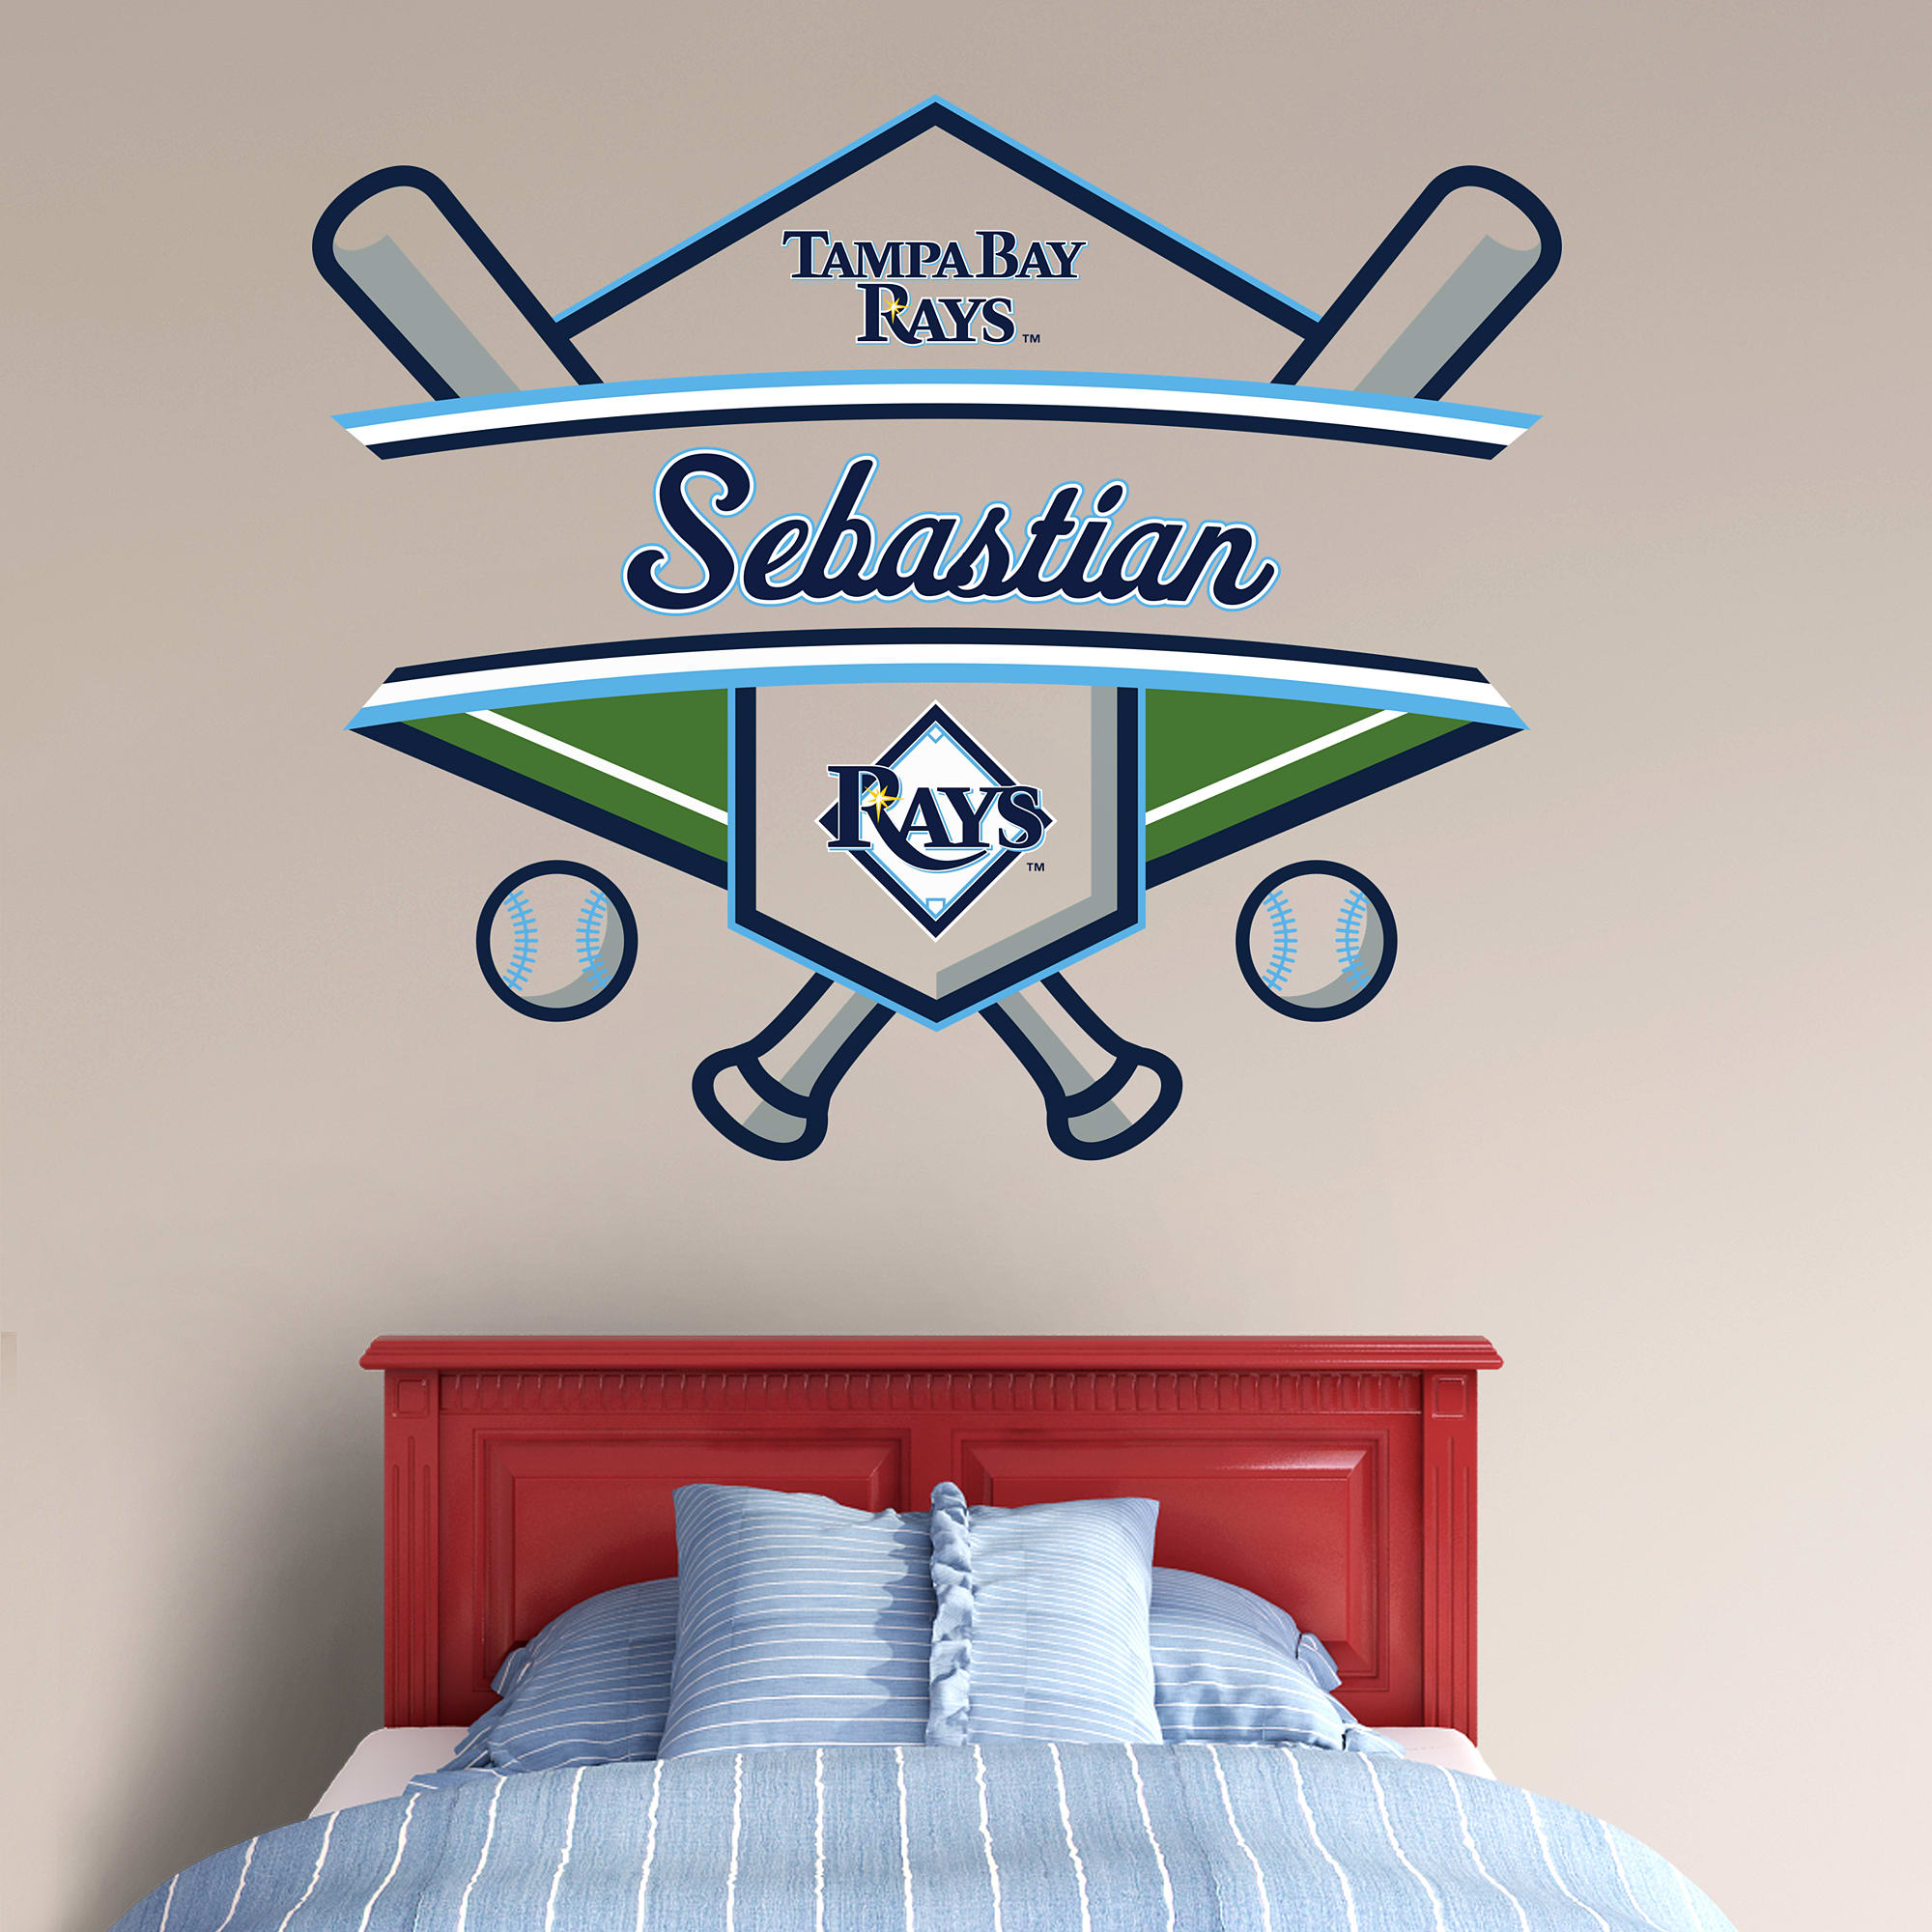 Tampa Bay Rays: Personalized Name - Officially Licensed MLB Transfer Decal 45.0"W x 39.0"H by Fathead | Vinyl